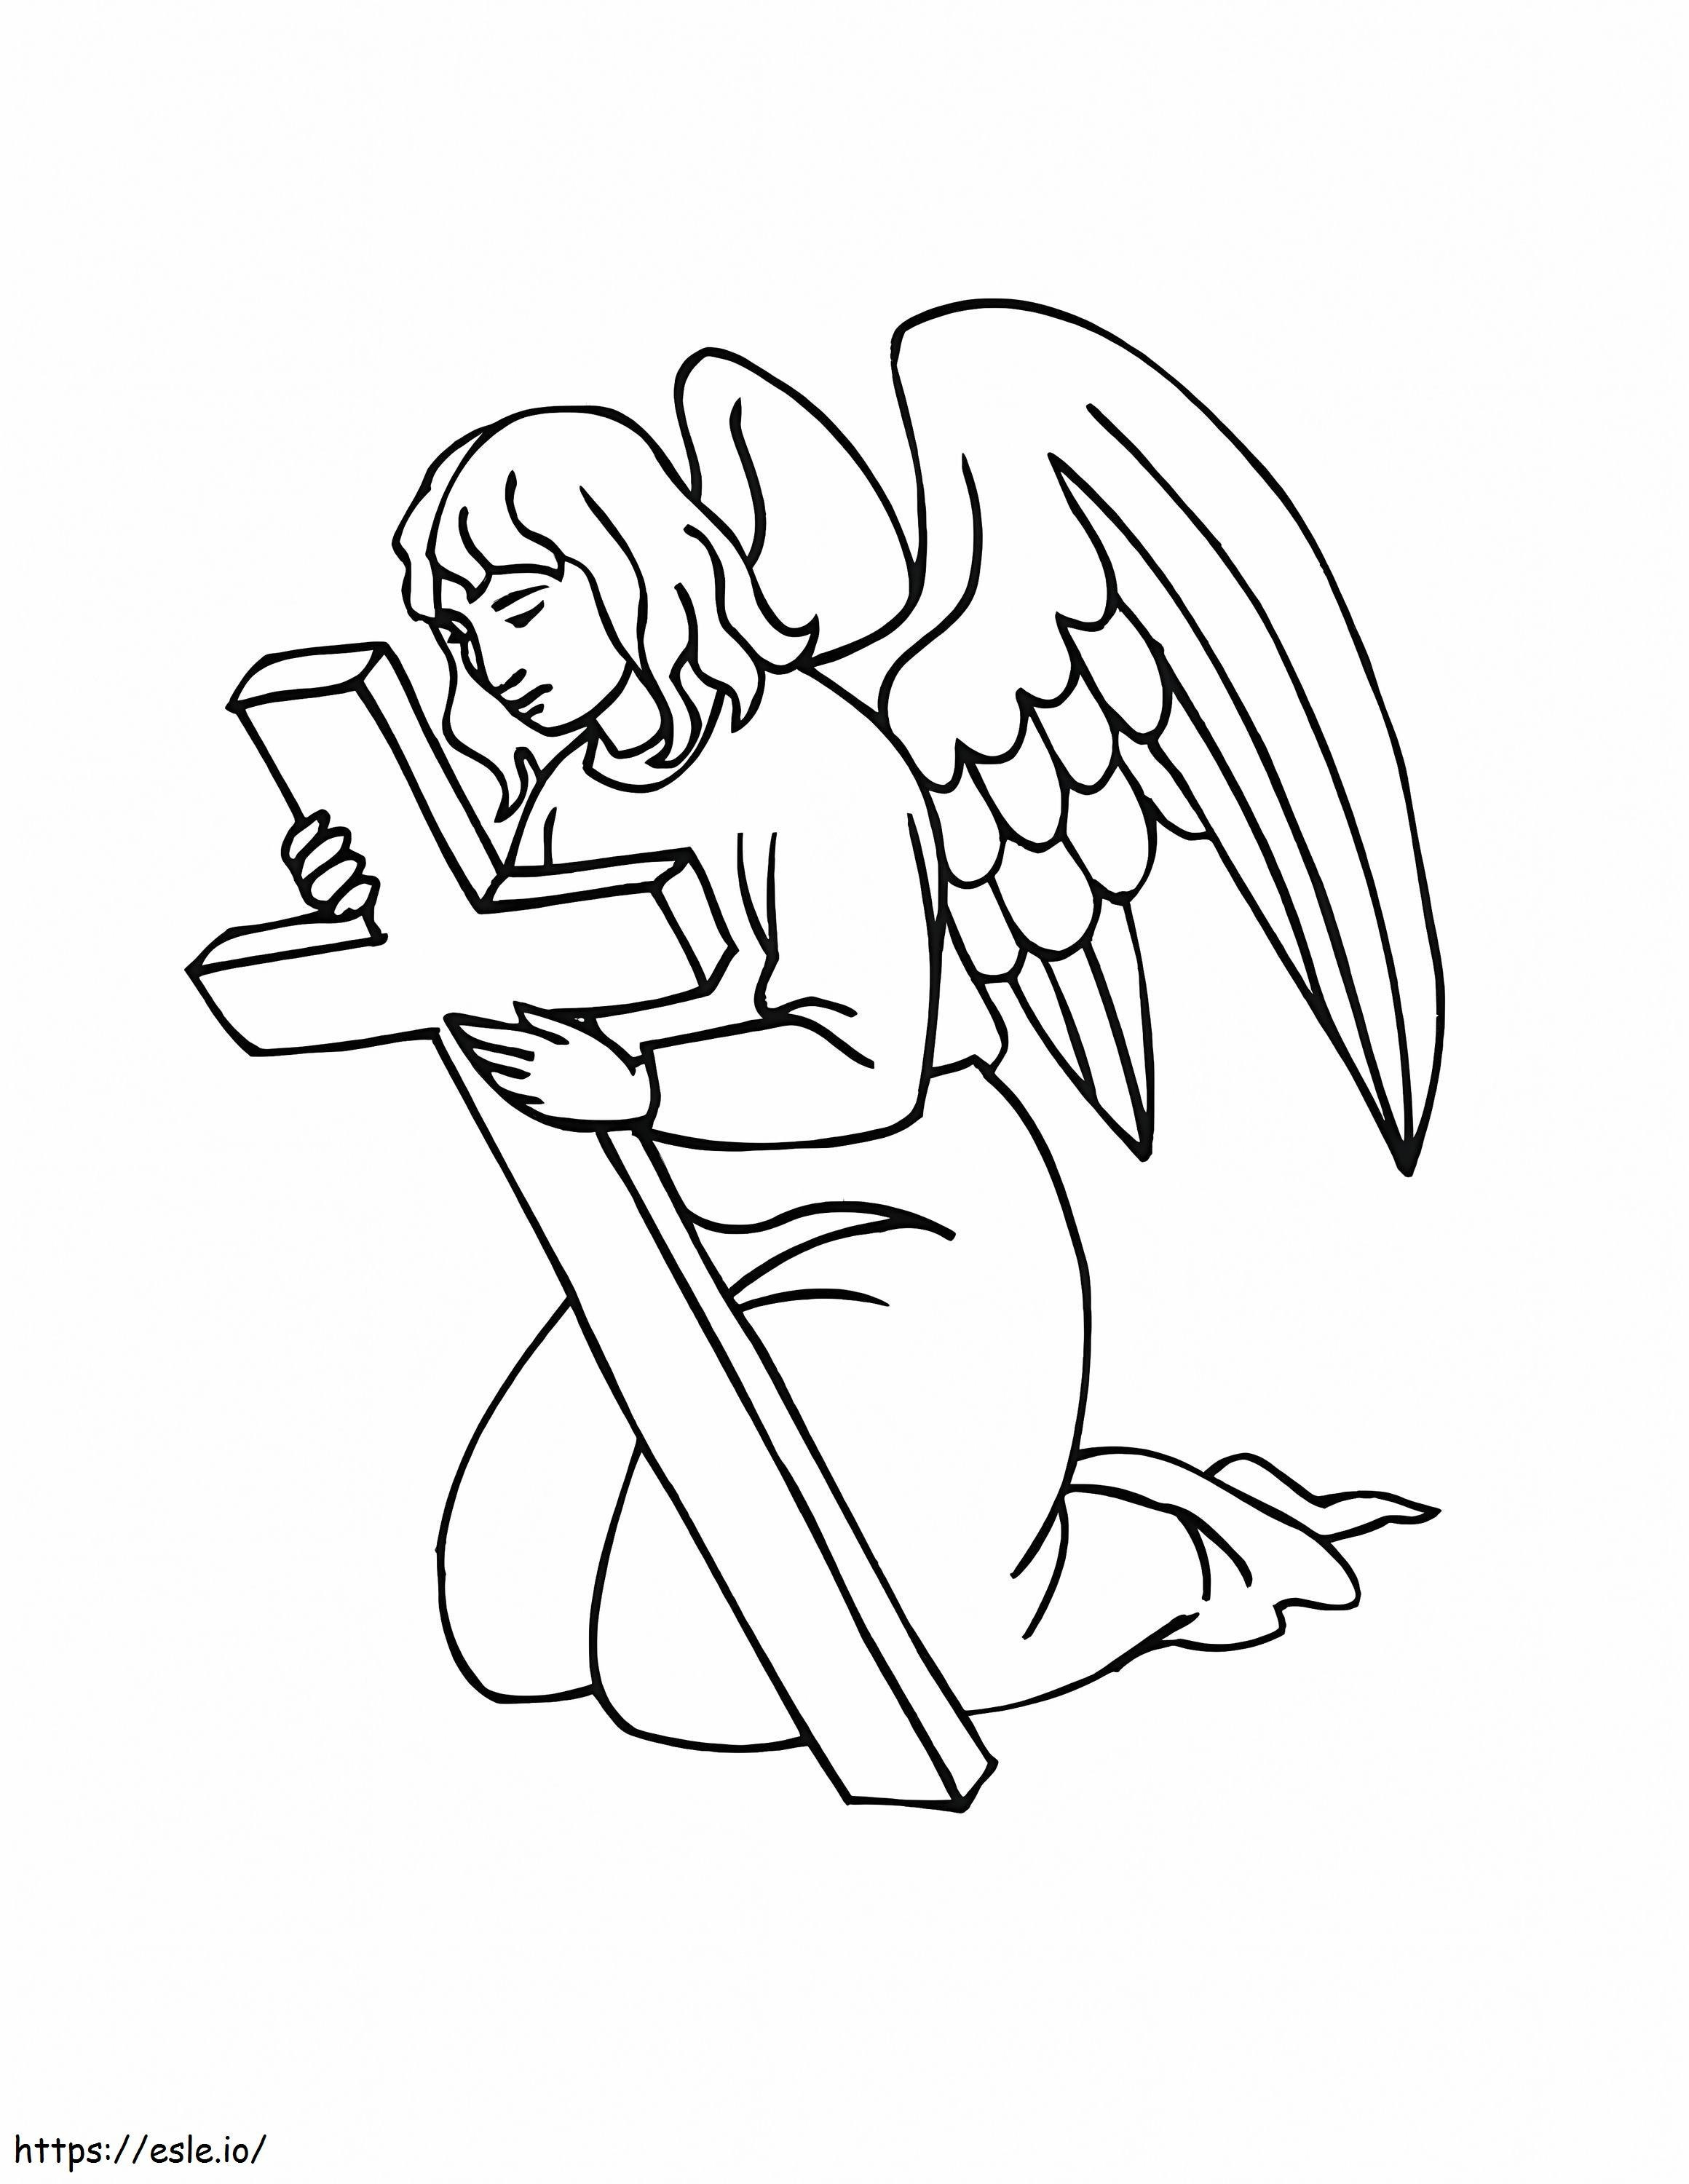 Angel Holding A Cross coloring page